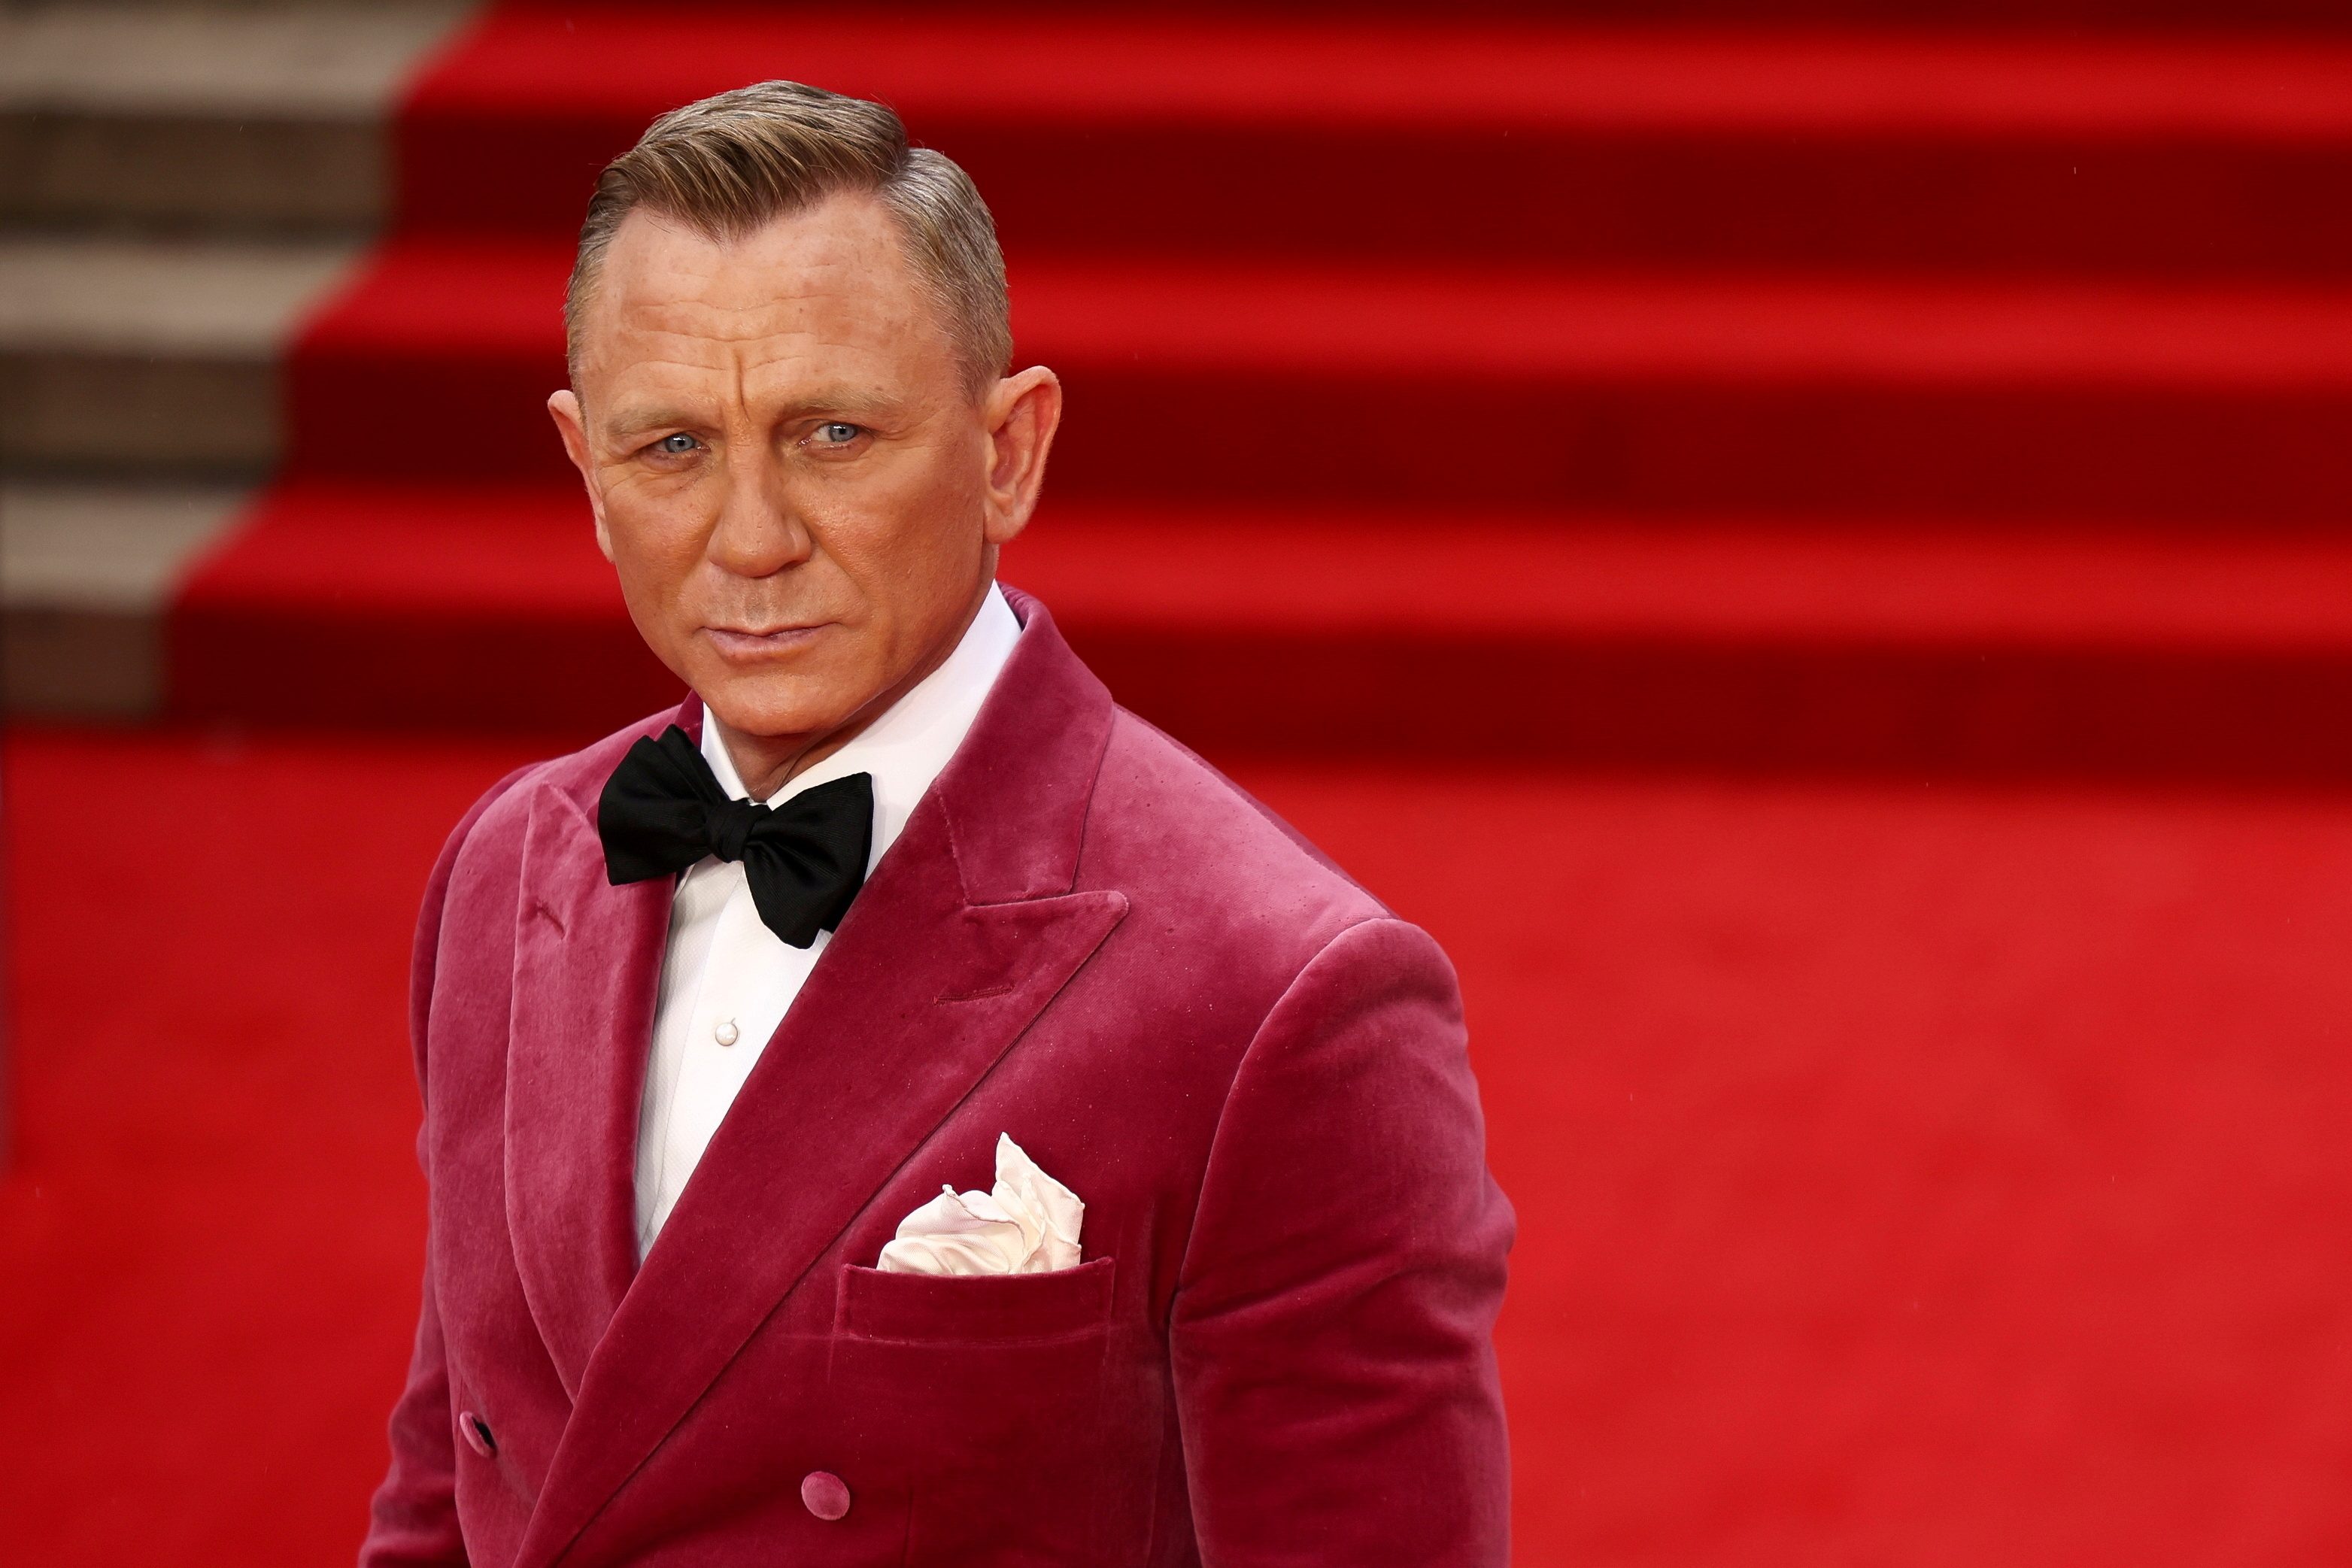 Mission accomplished: Critics praise new Bond film ‘No Time To Die’